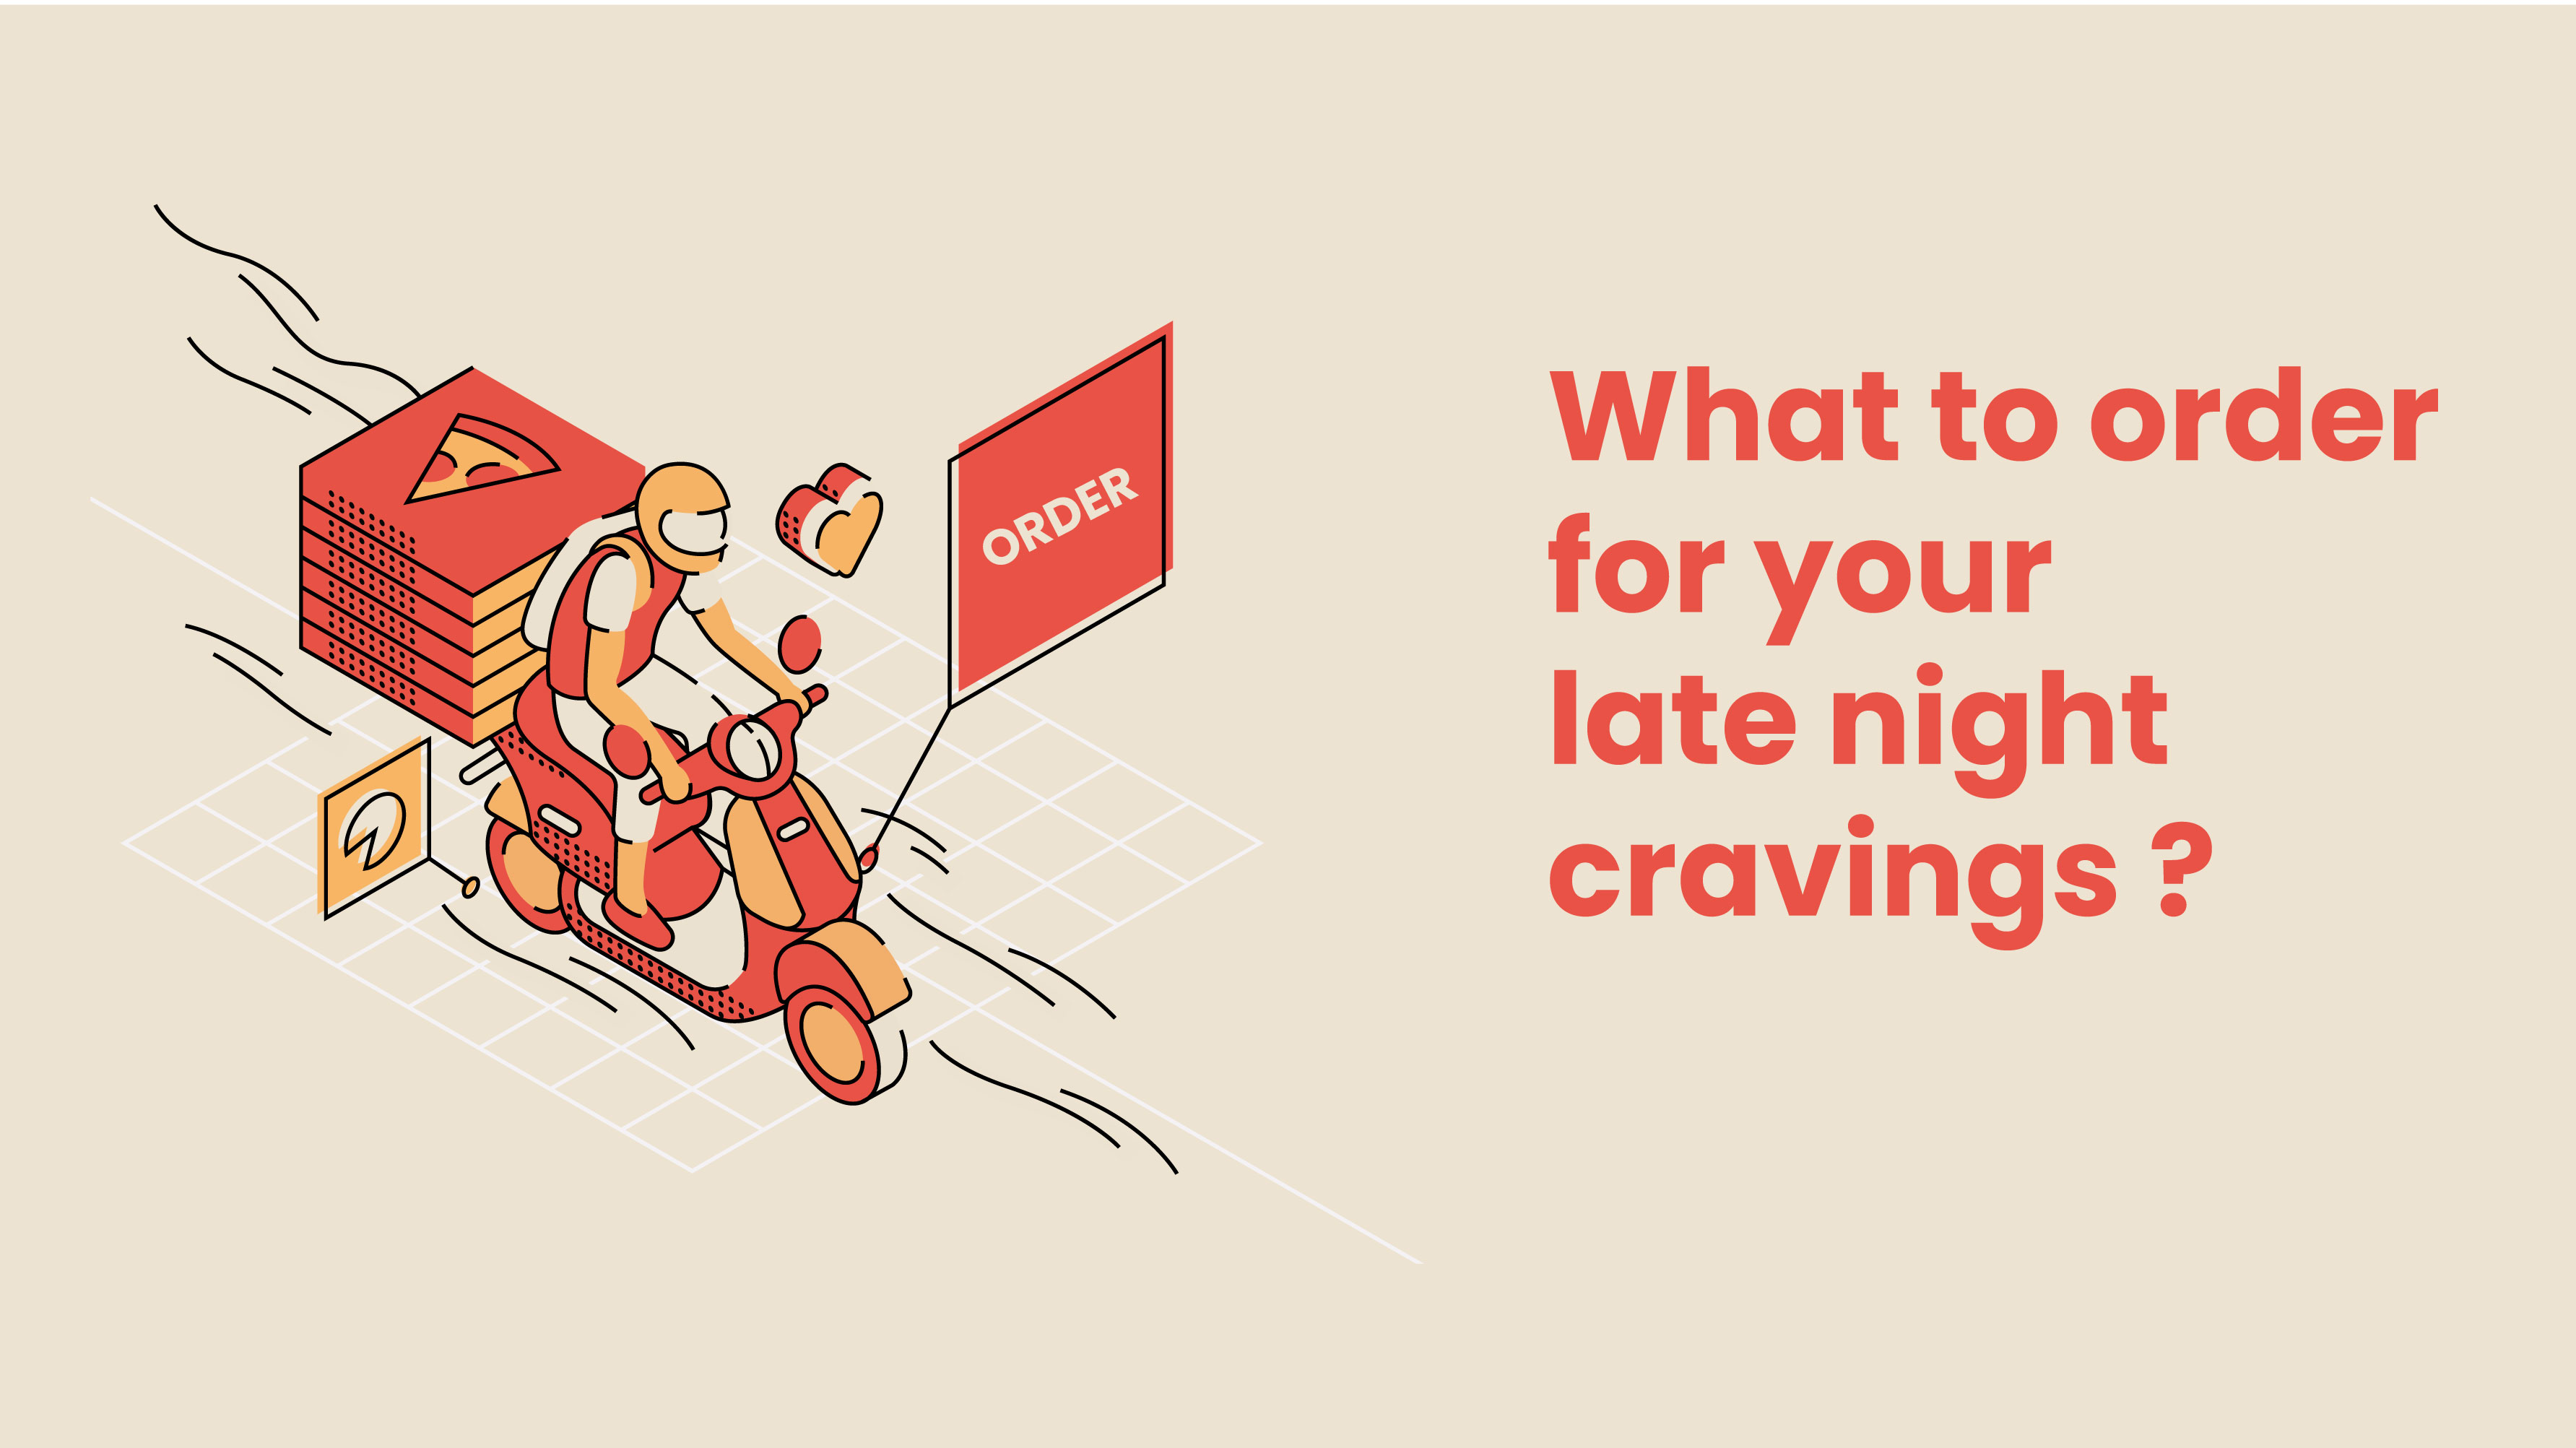 What to order for your late night cravings ?